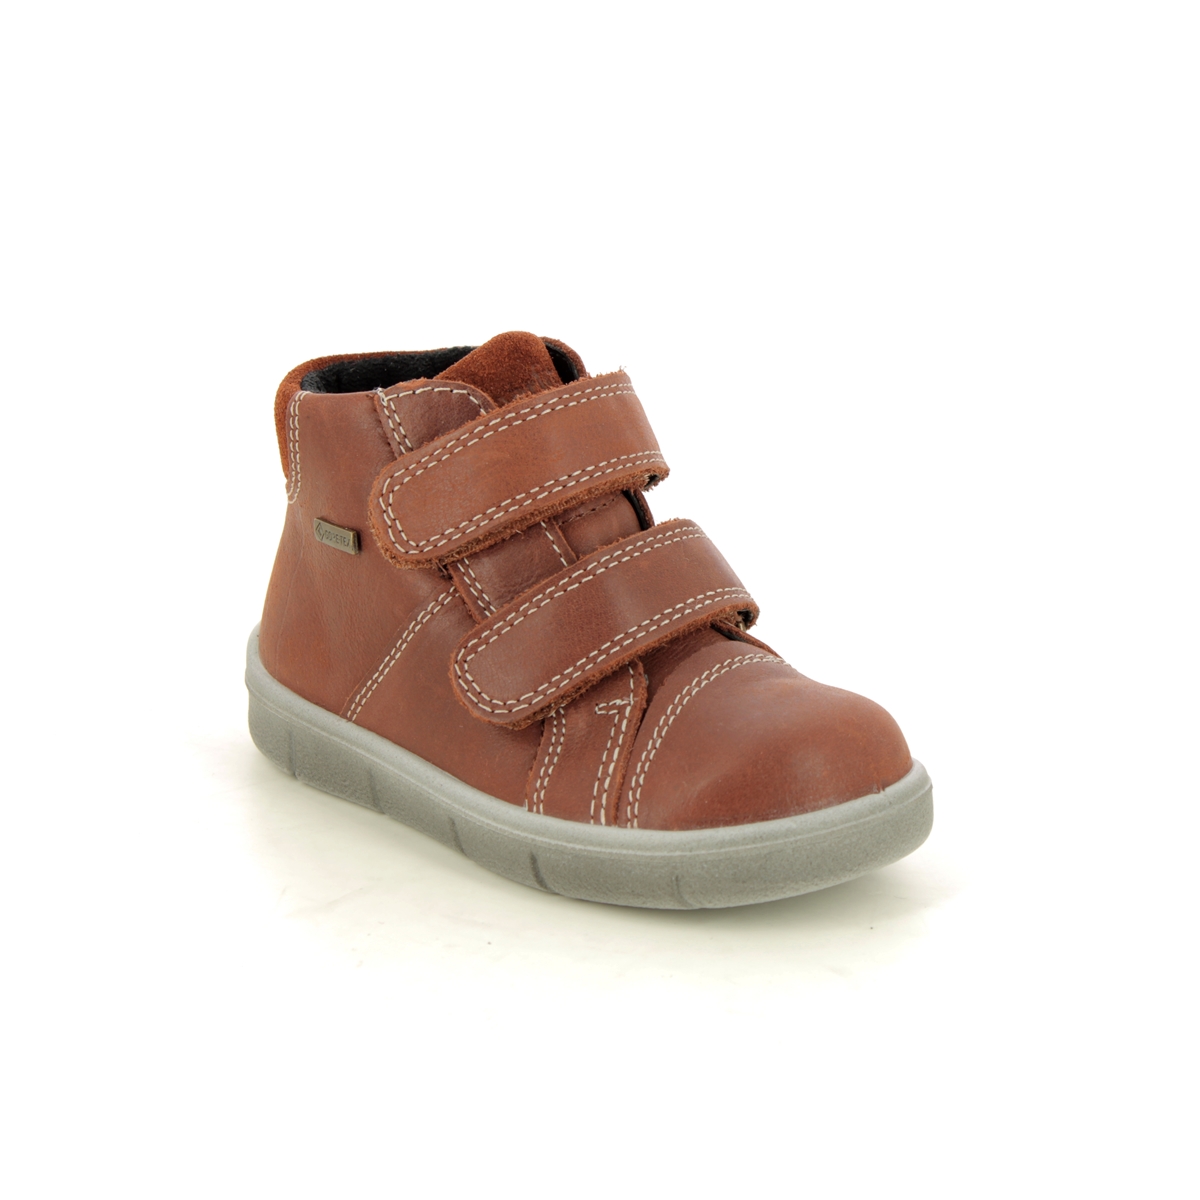 Superfit Ulli 2V Gtx Tan Leather  Kids Toddler Boys Boots 0800423-3000 In Size 25 In Plain Tan Leather